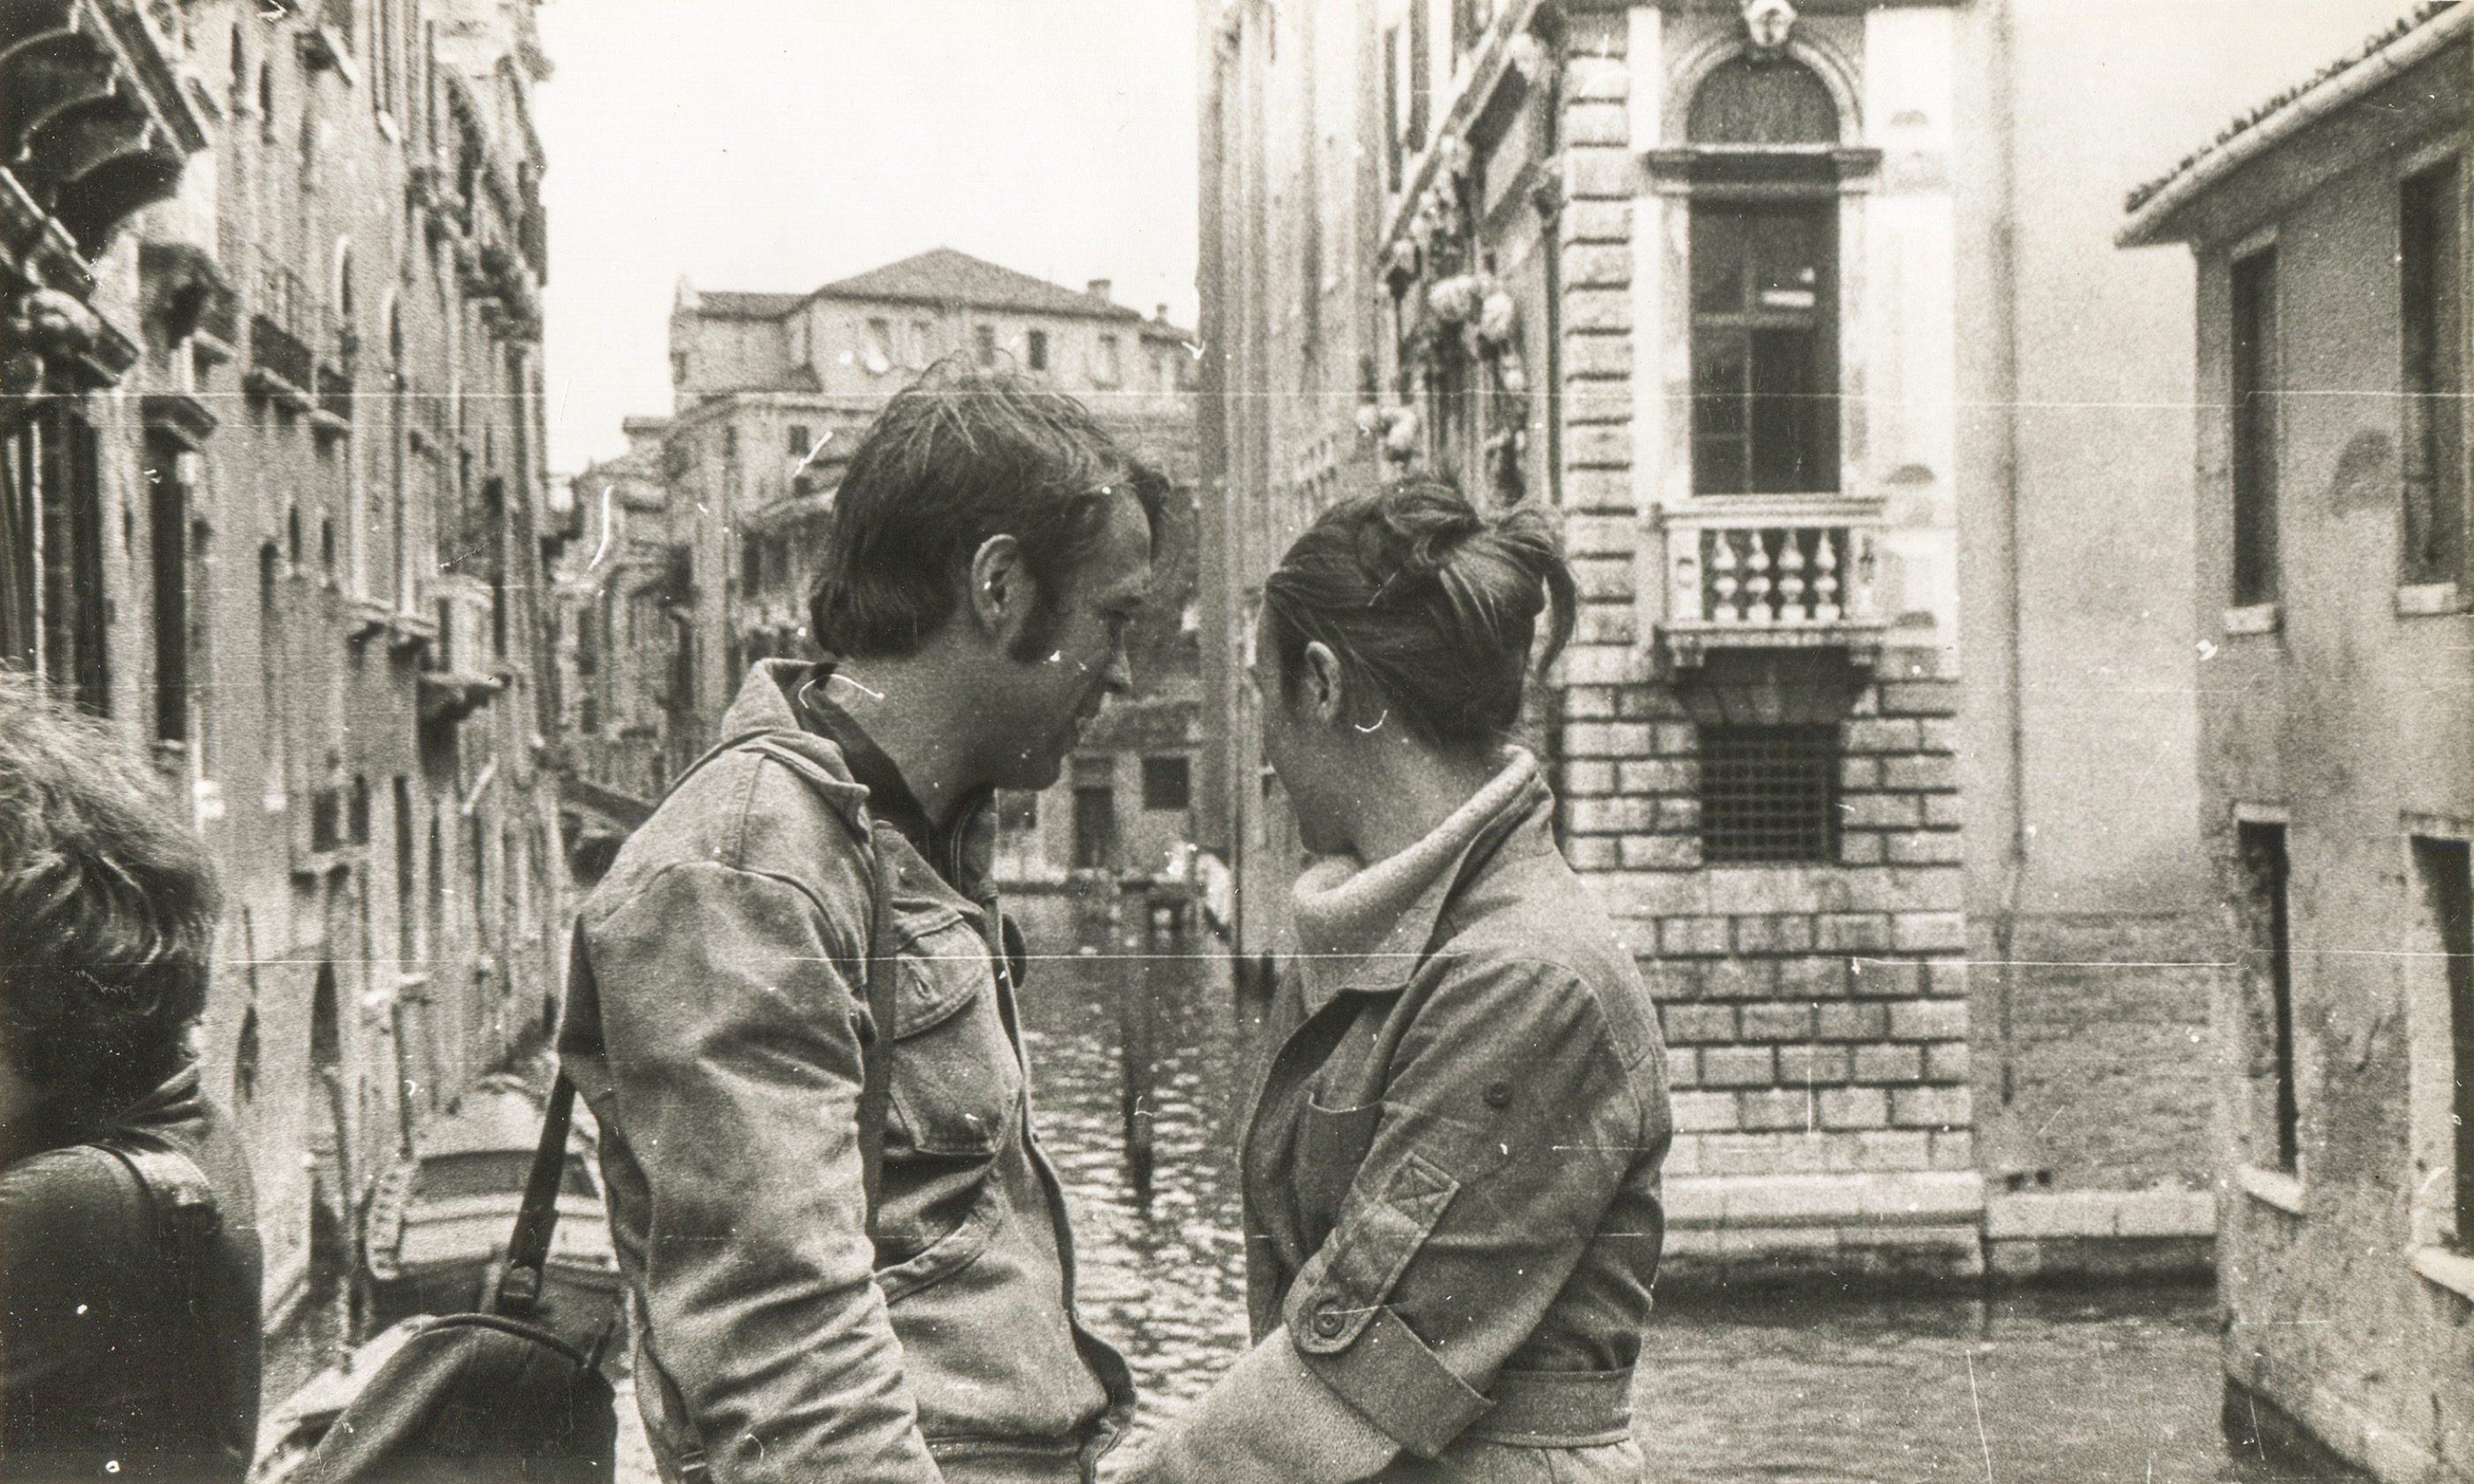 Young couple in Venice in the '70s (Shutterstock.com. See main credit below)